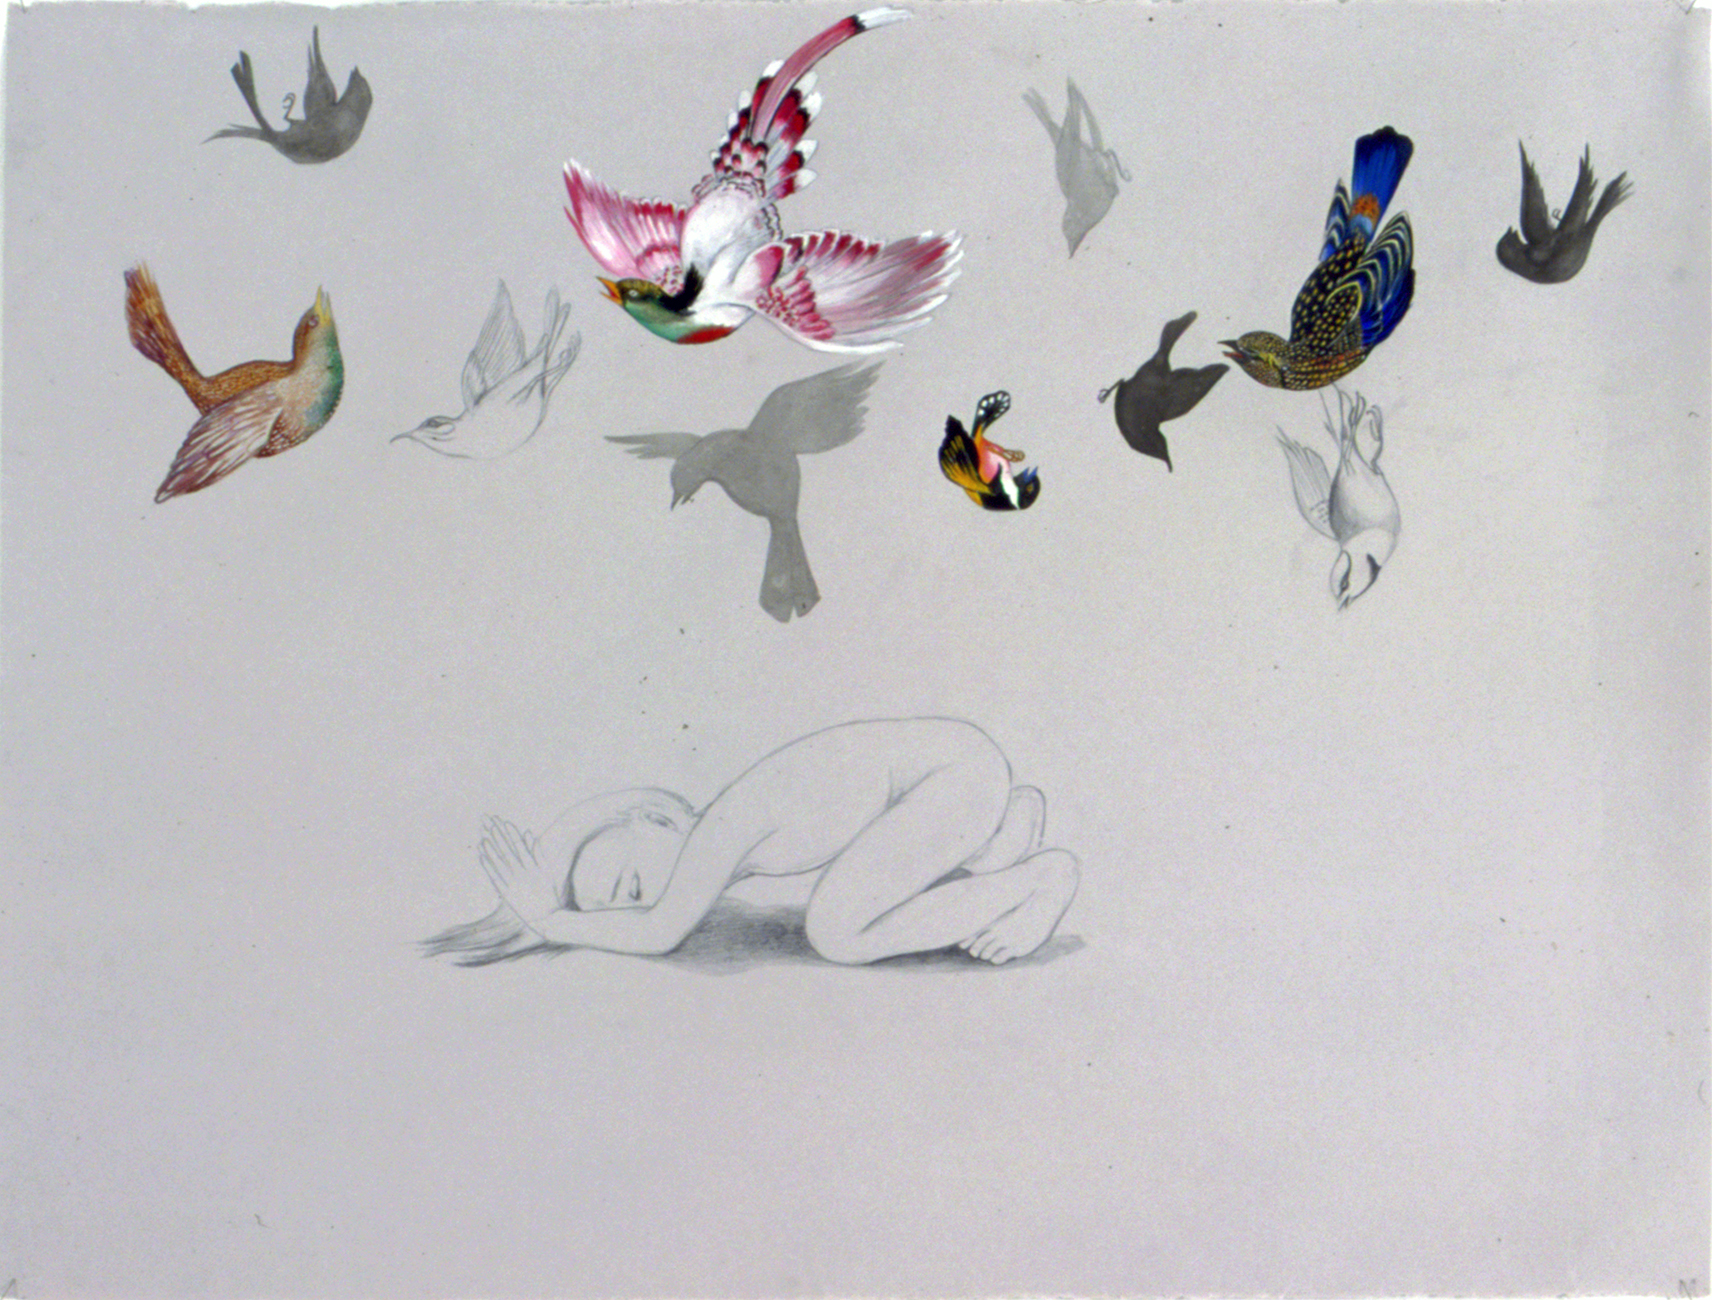   Pray For The Death Of Birds , 2004 Graphite, ink, gouache on gray paper 38 X 50 inches Private collection 